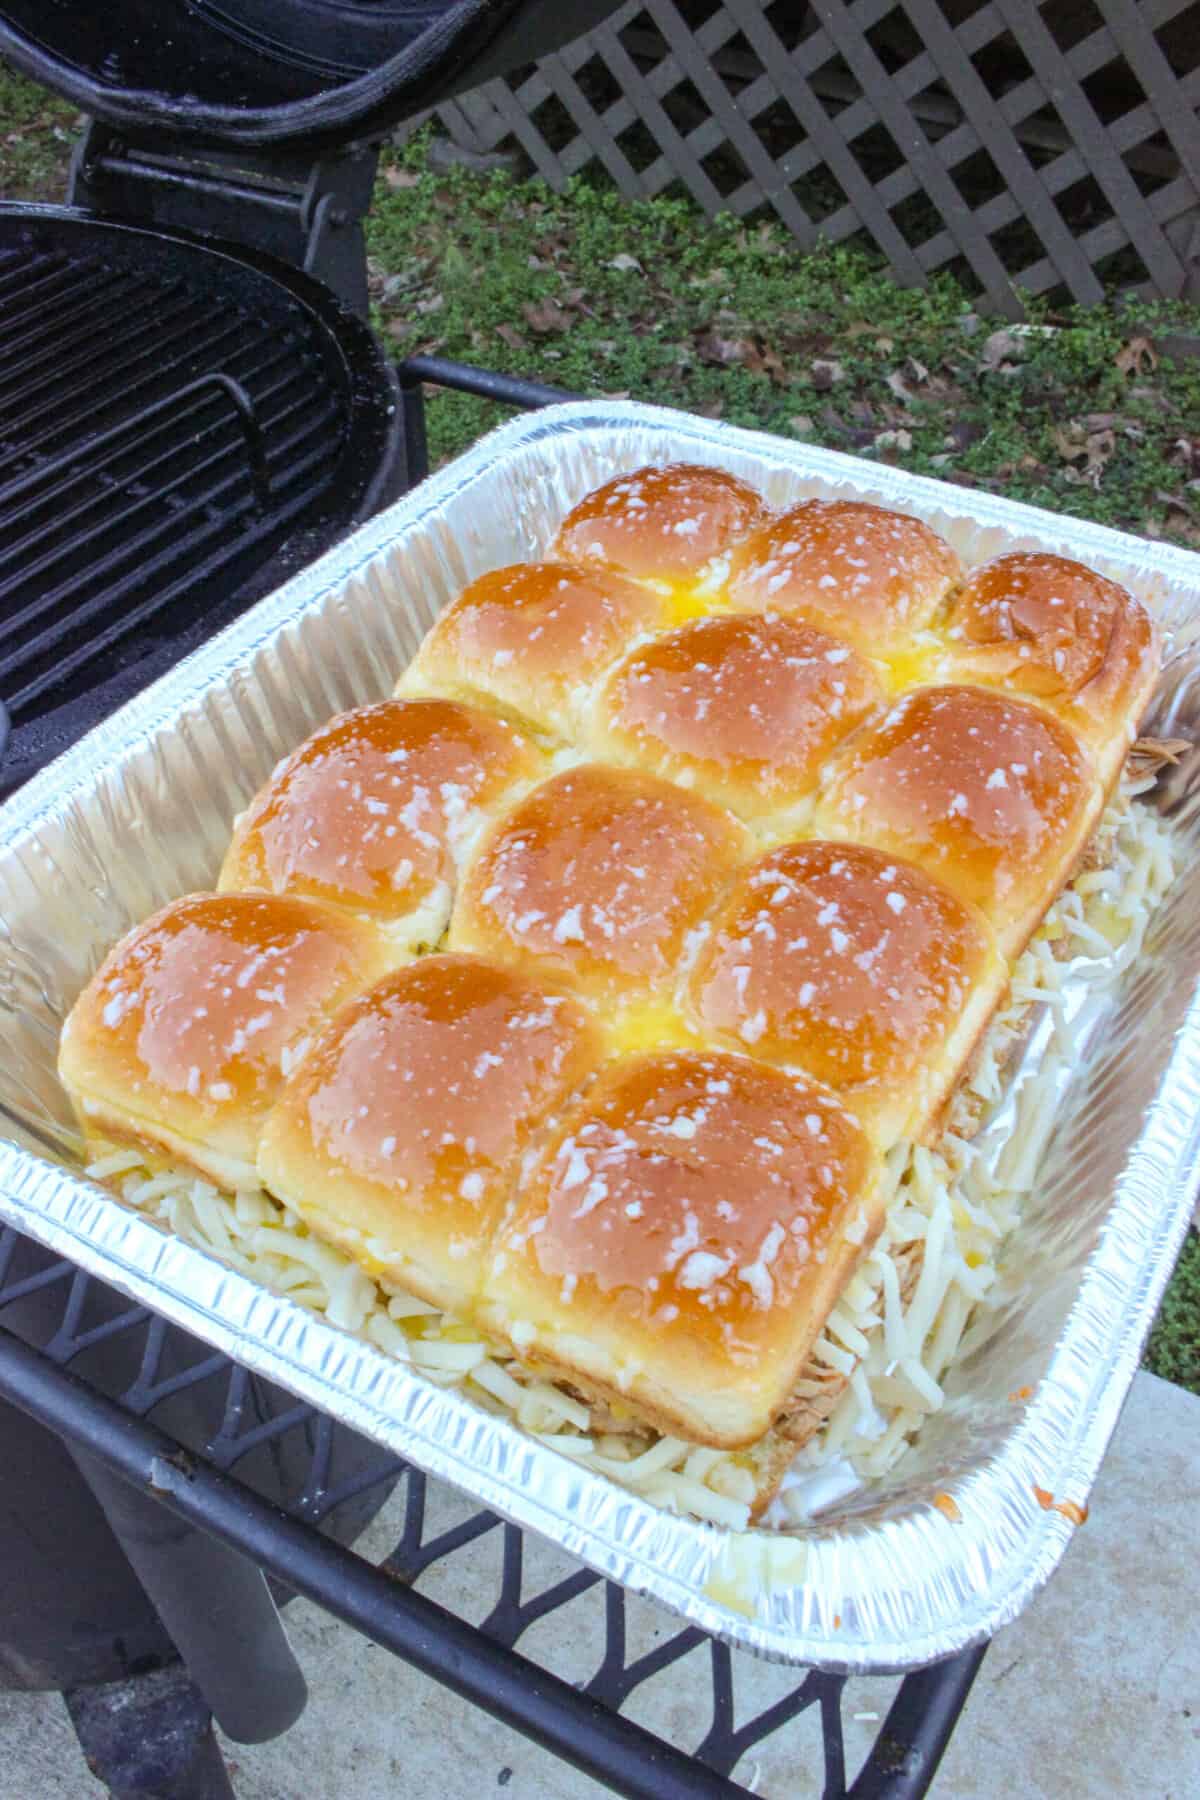 The buffalo chicken sliders covered in the butter glaze.